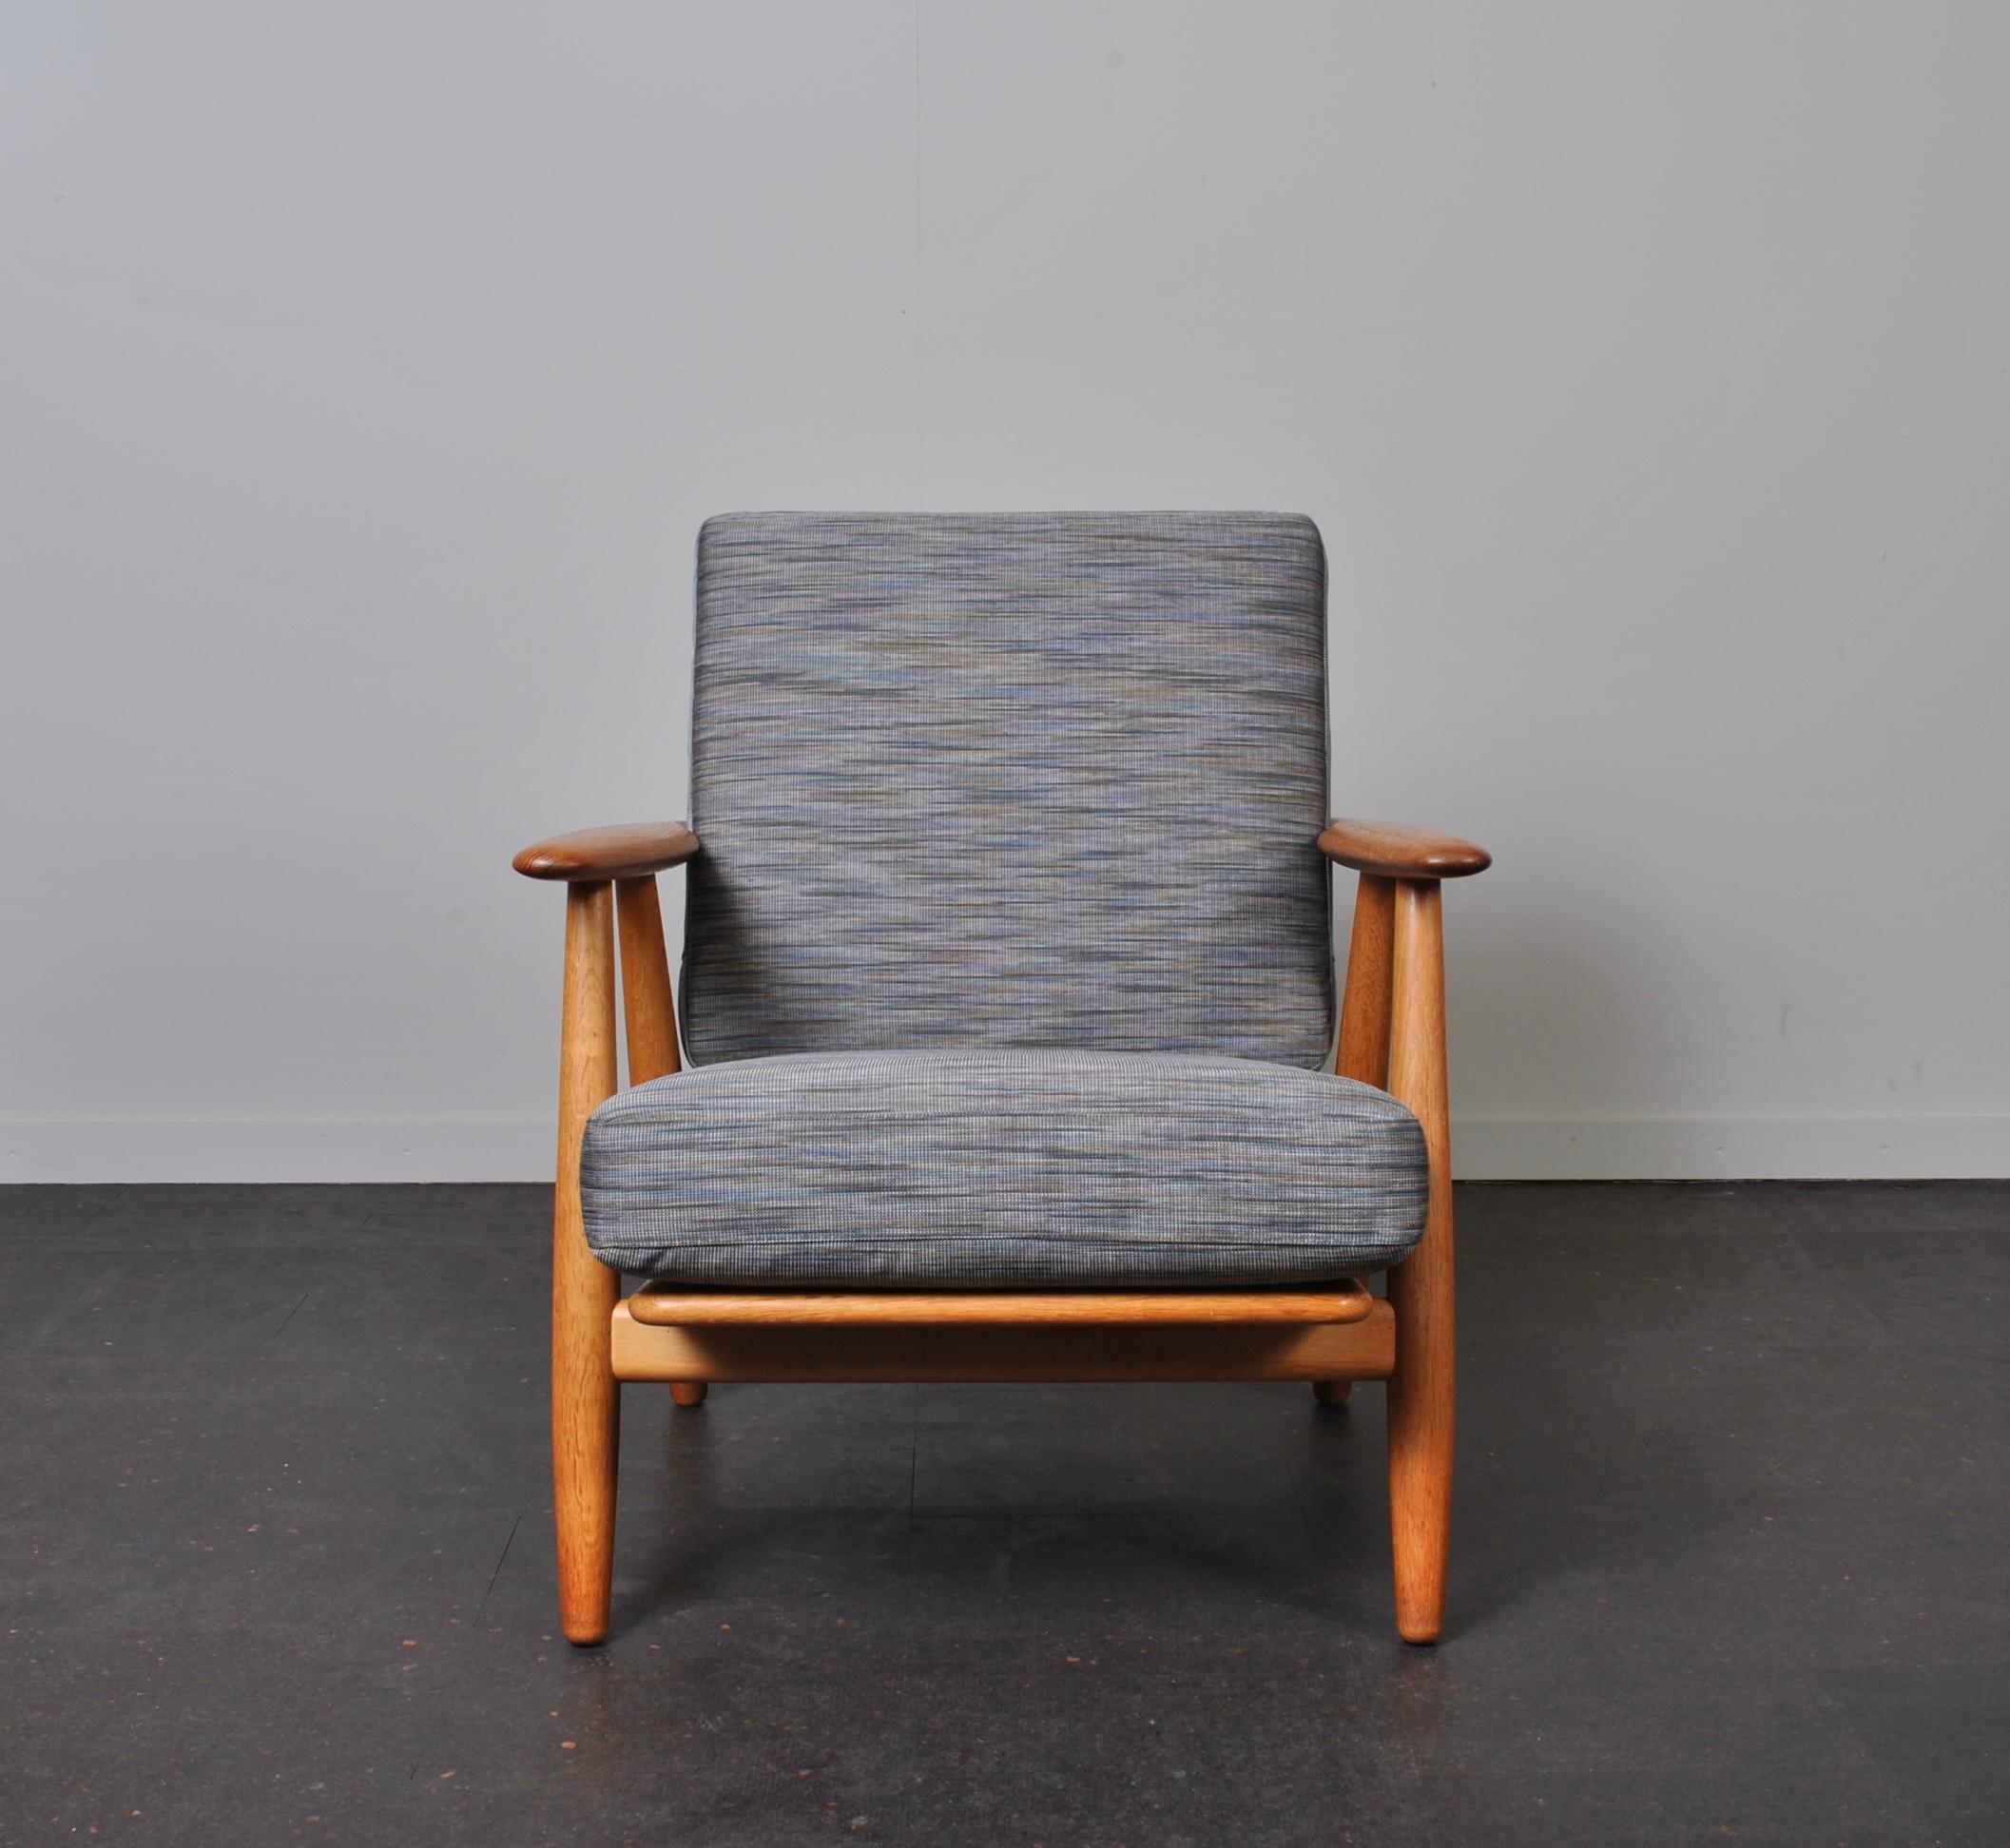 The original 1950s Hans Wegner GE240 cigar chair in oak with new horsehair fabric upholstery. Produced by GETAMA, Denmark. In superb condition. Thoroughly cleaned and polished.
One of master designer Hans Wegners most coveted pieces.
We do have a